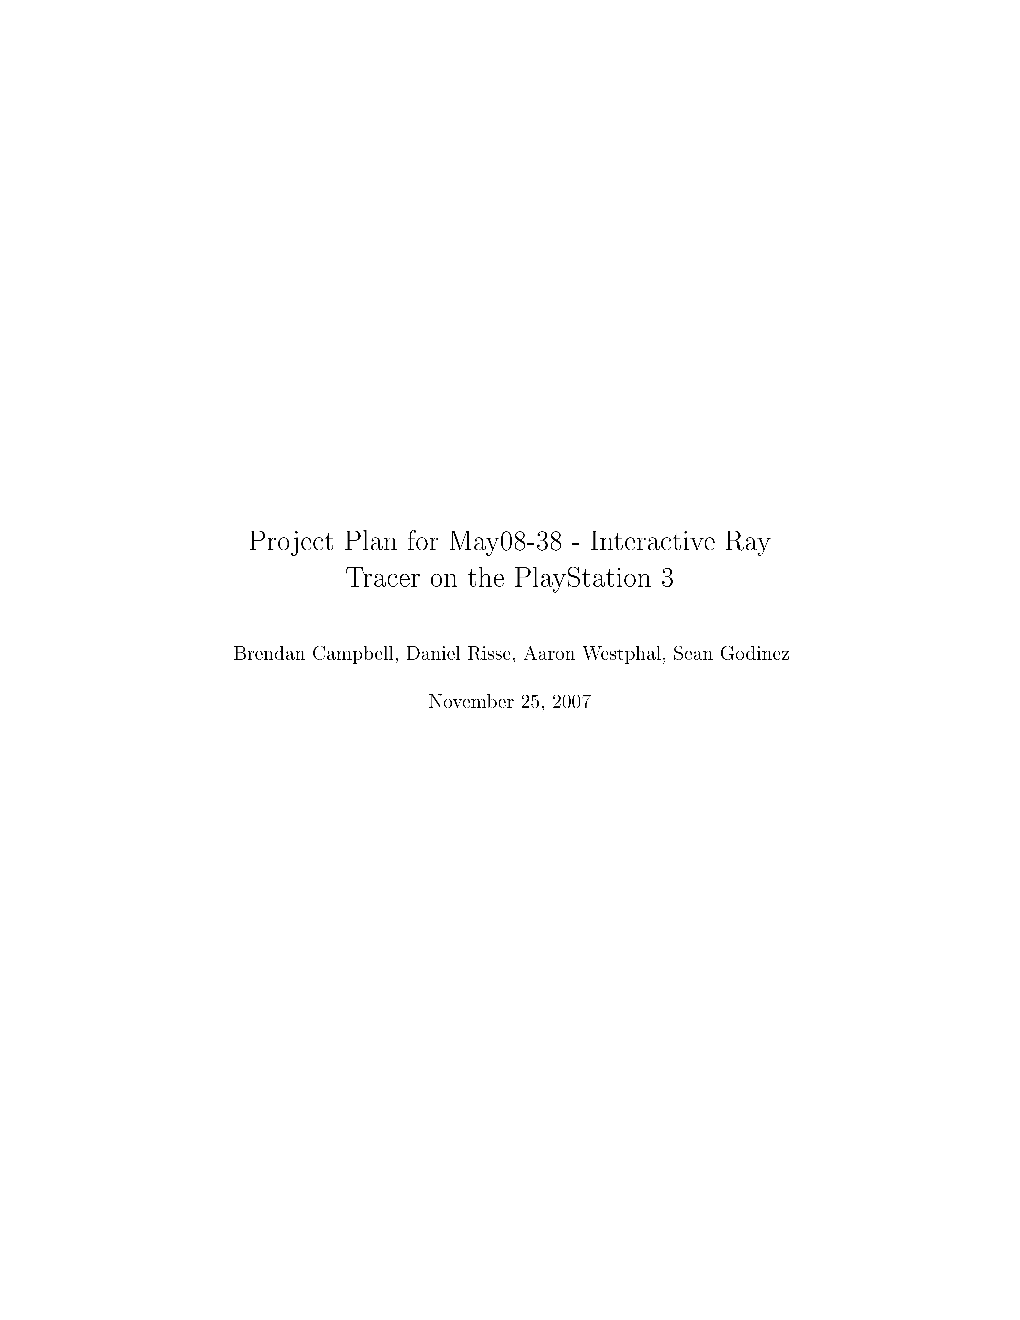 Project Plan for May08-38 - Interactive Ray Tracer on the Playstation 3